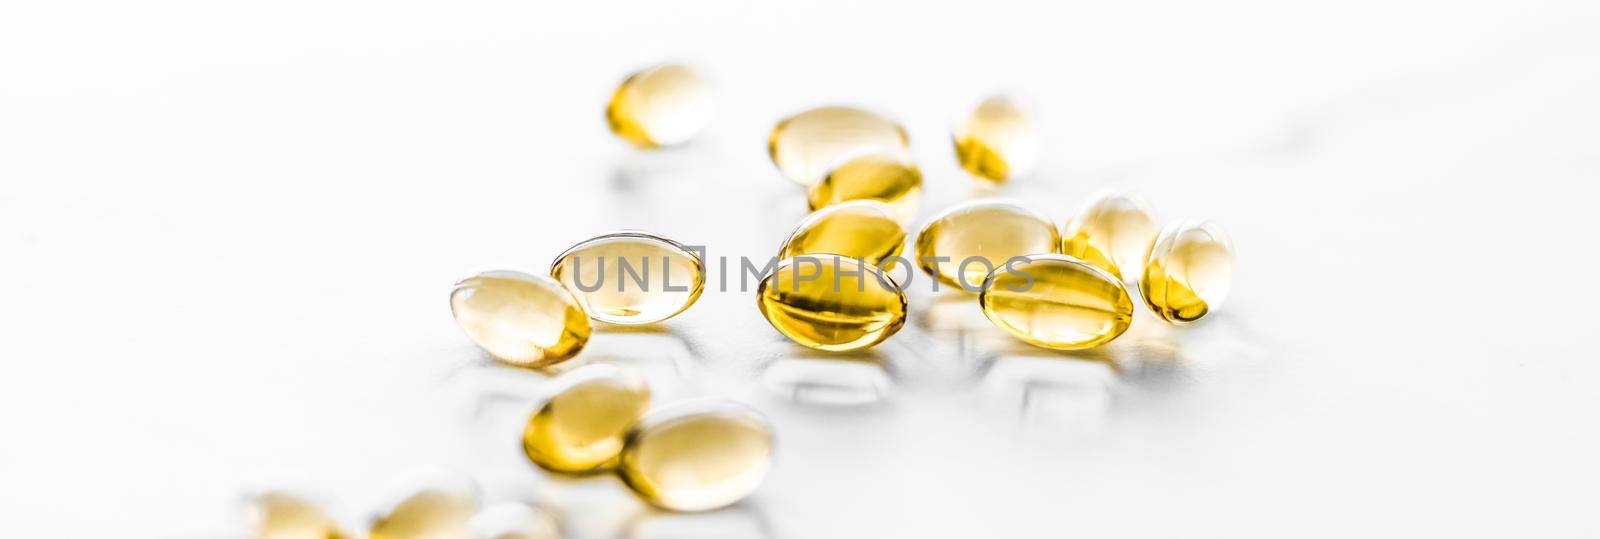 Vitamin D and golden Omega 3 pills for healthy diet nutrition, fish oil food supplement pill capsules, healthcare and medicine as pharmacy background by Anneleven